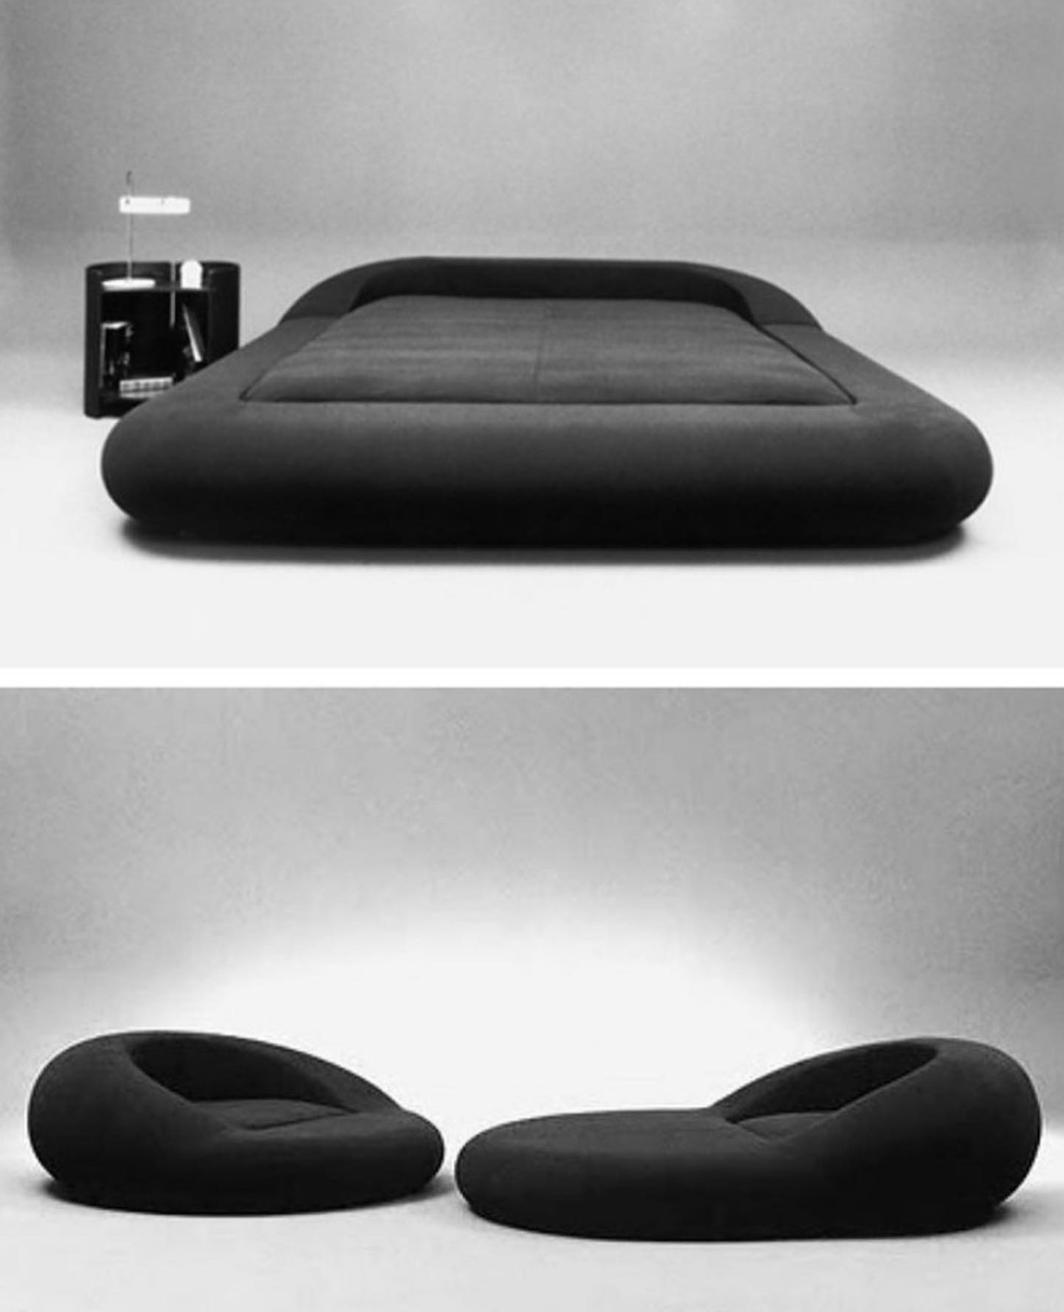 ‘Tennis’ Bed by Gae Aulenti for Gavina, 1970s 